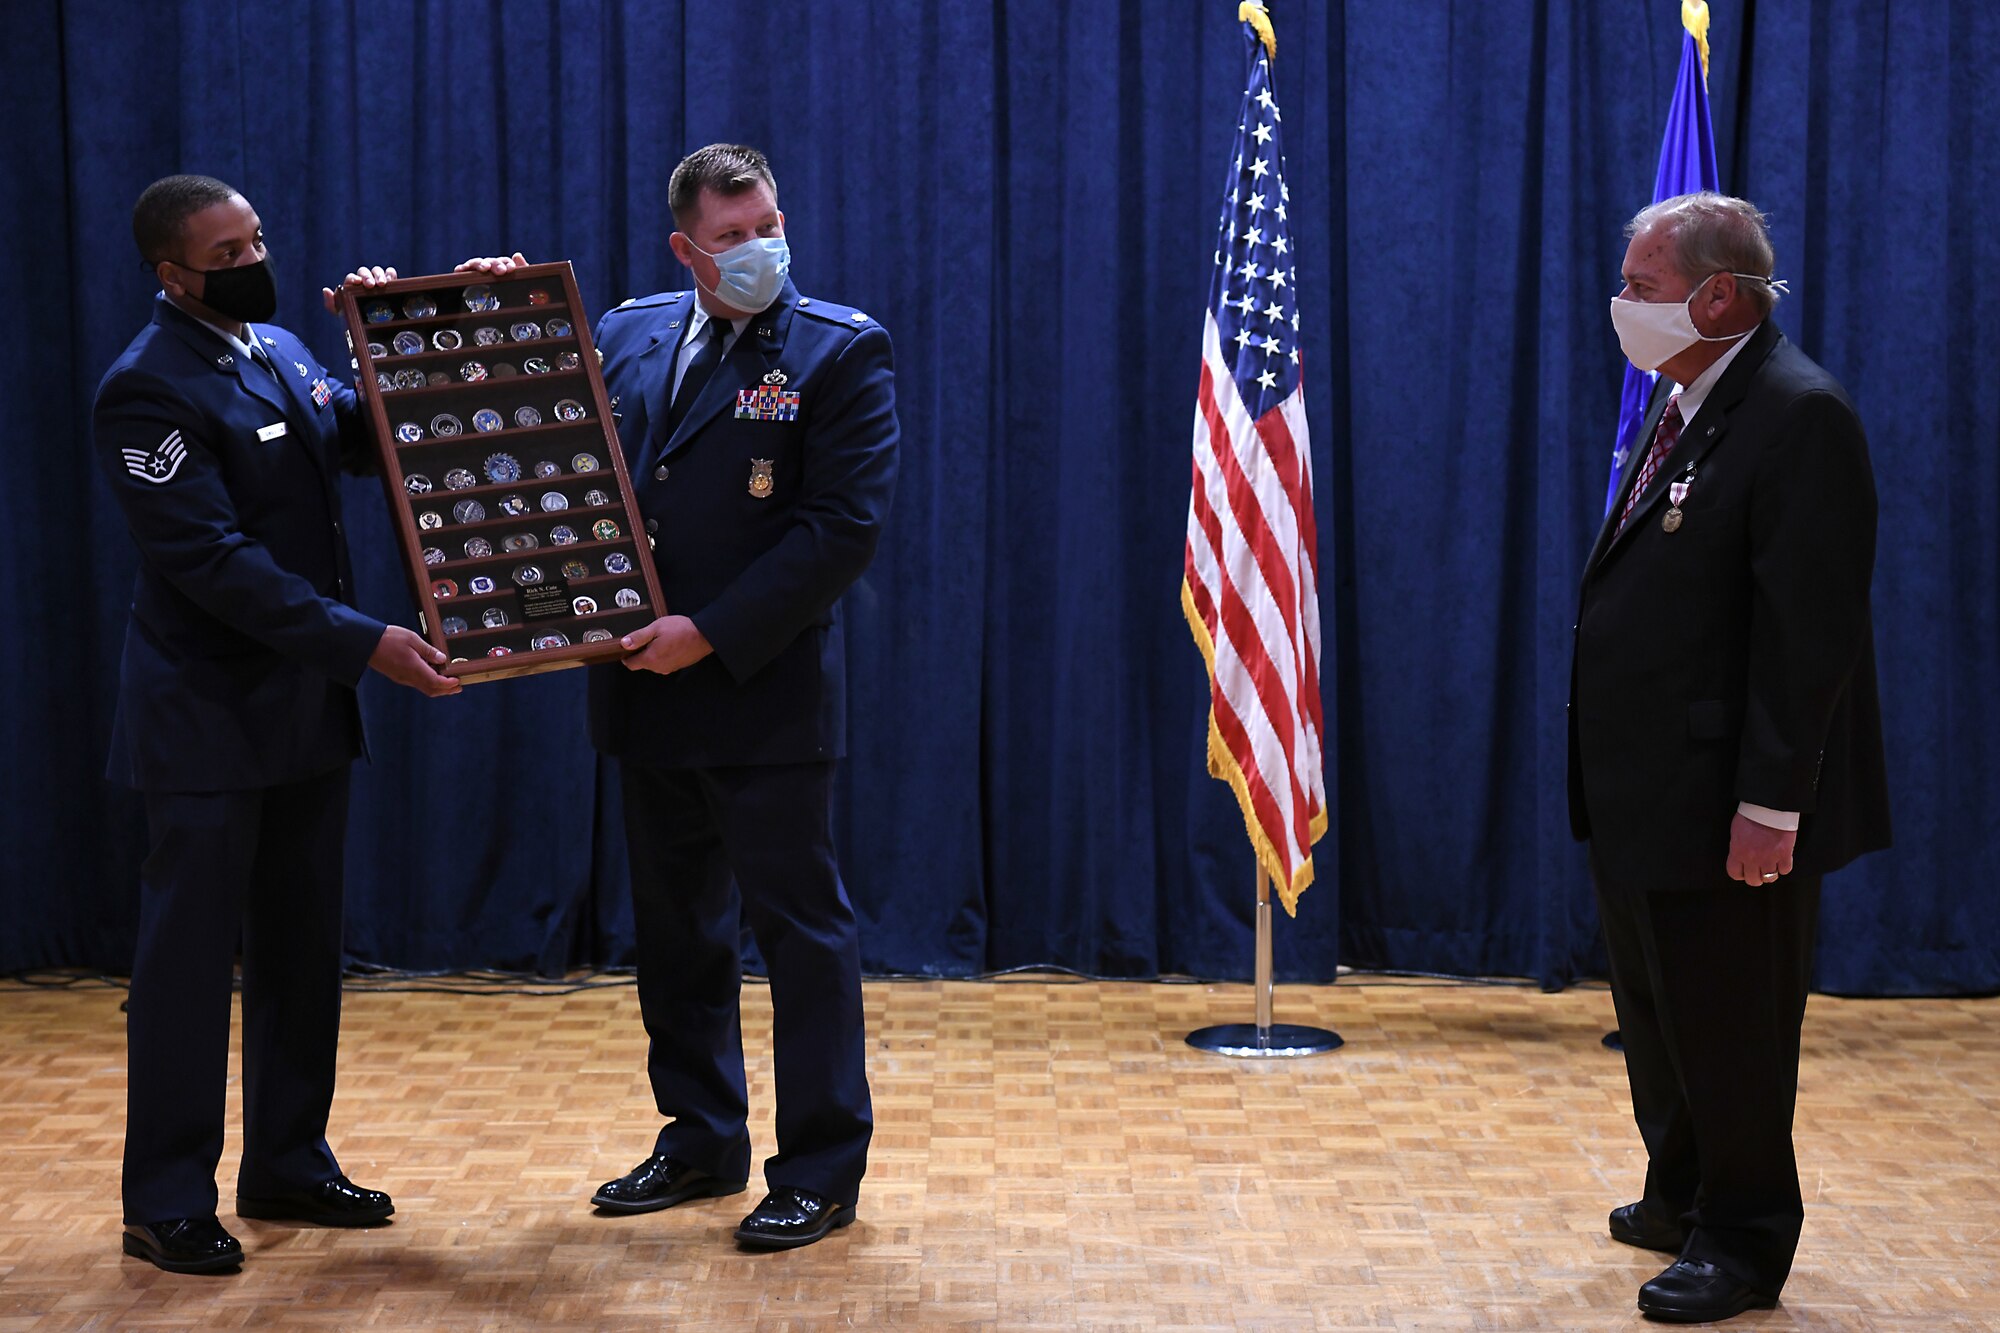 Richard Cote, 30th Civil Engineer Squadron deputy commander, is presented with a gift during his retirement ceremony June 25, 2020, at Vandenberg Air Force Base, Calif.